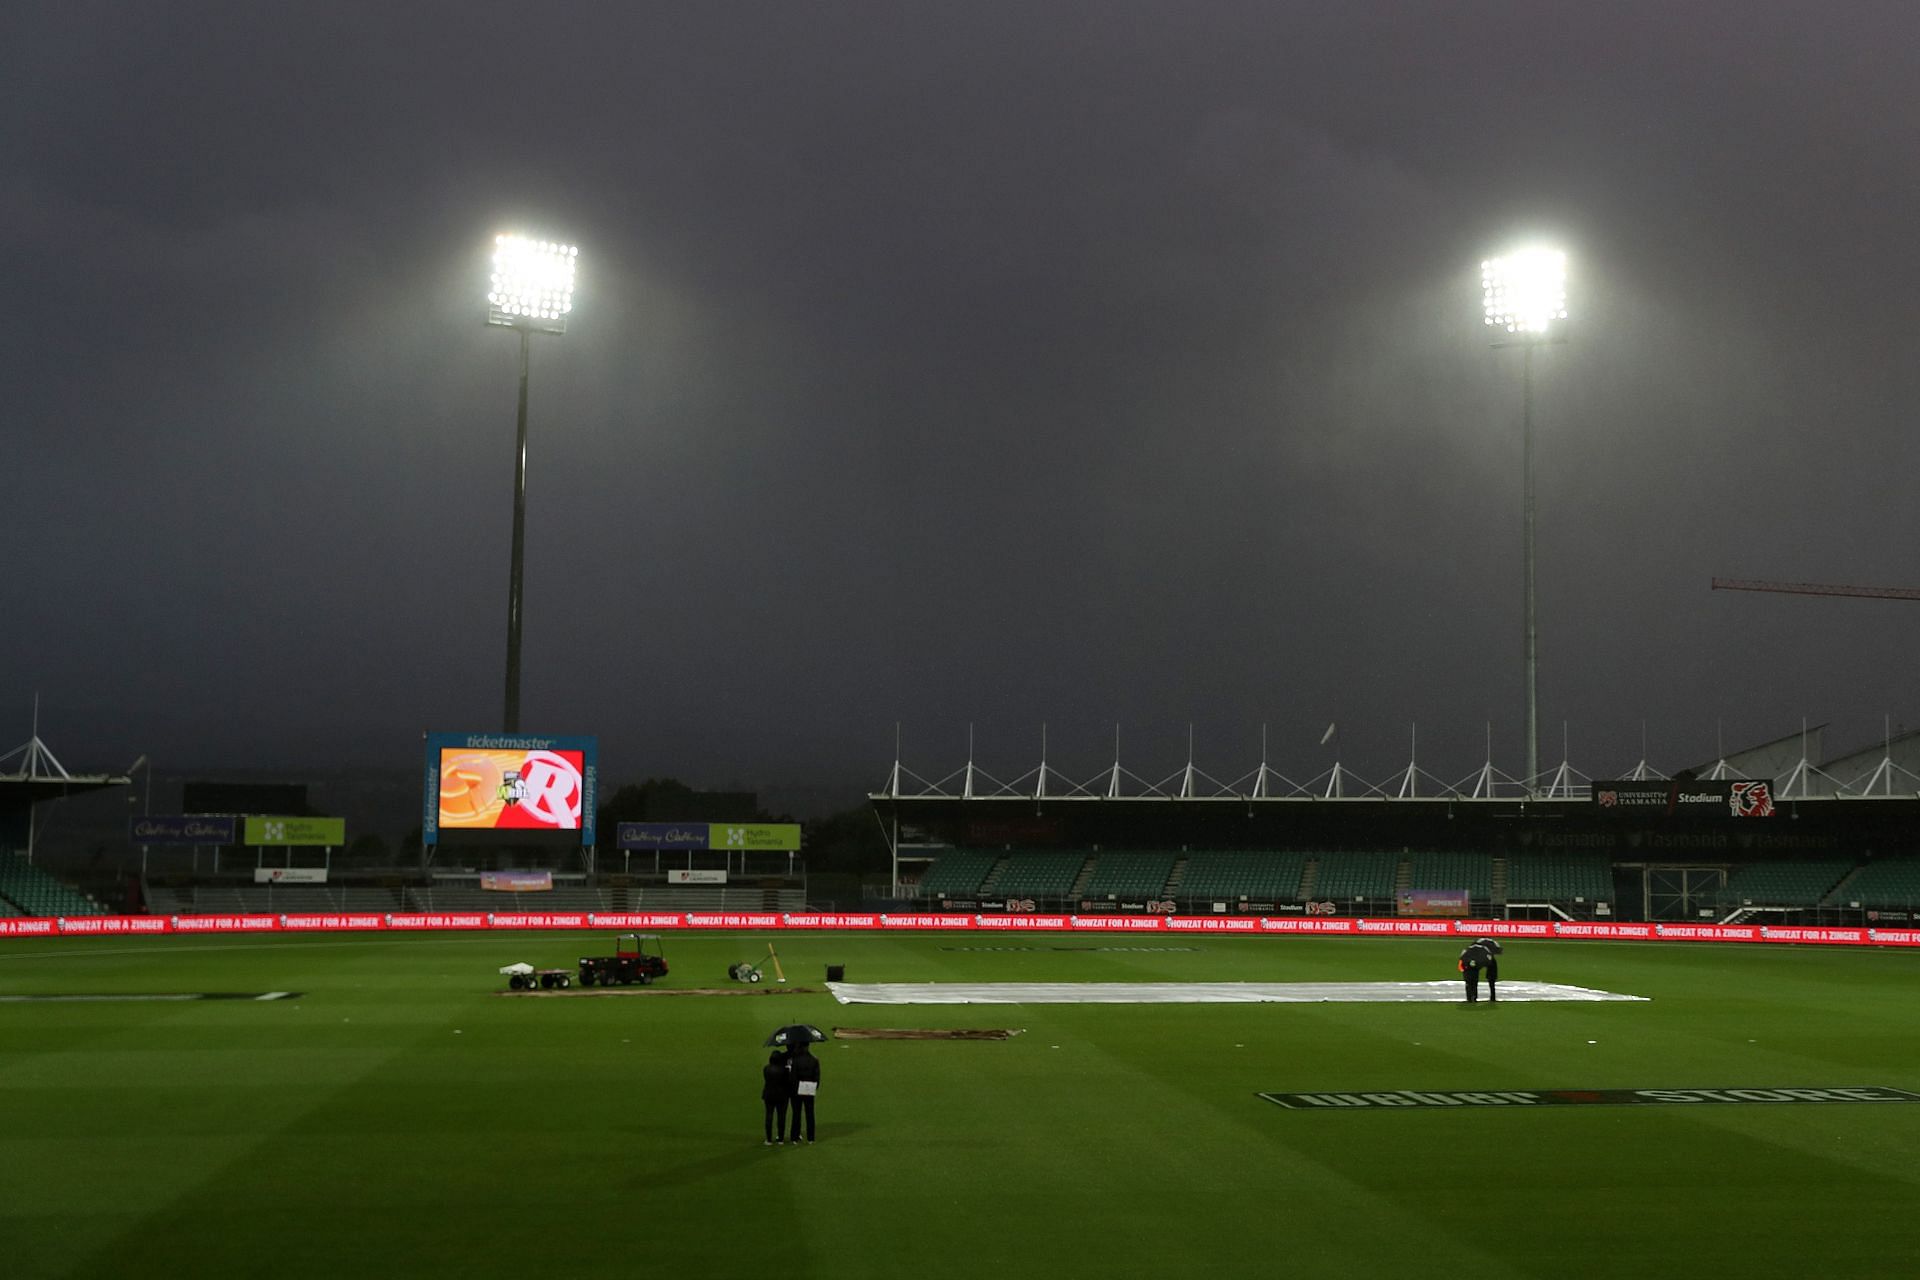 Perth Scorchers Women&#039;s previous match got washed out